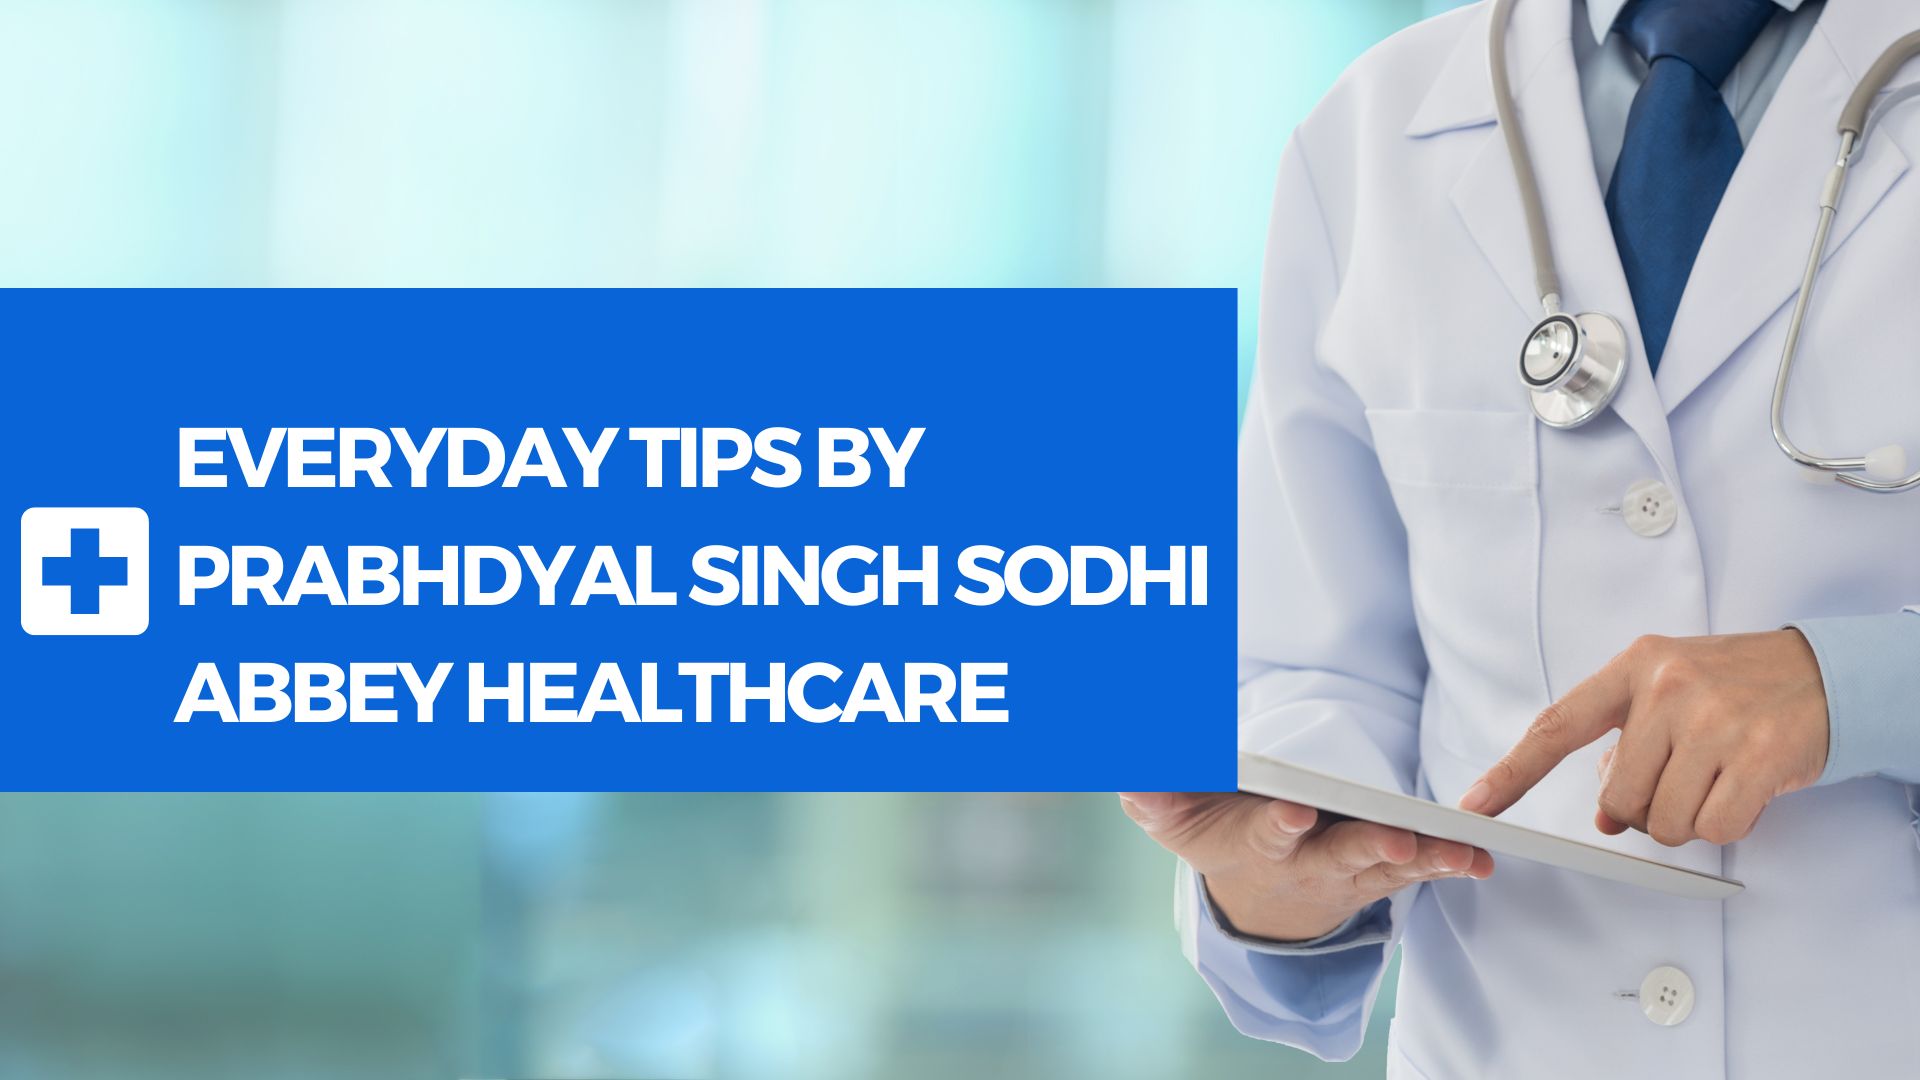 Everyday Tips by Prabhdyal Singh Sodhi Abbey Healthcare